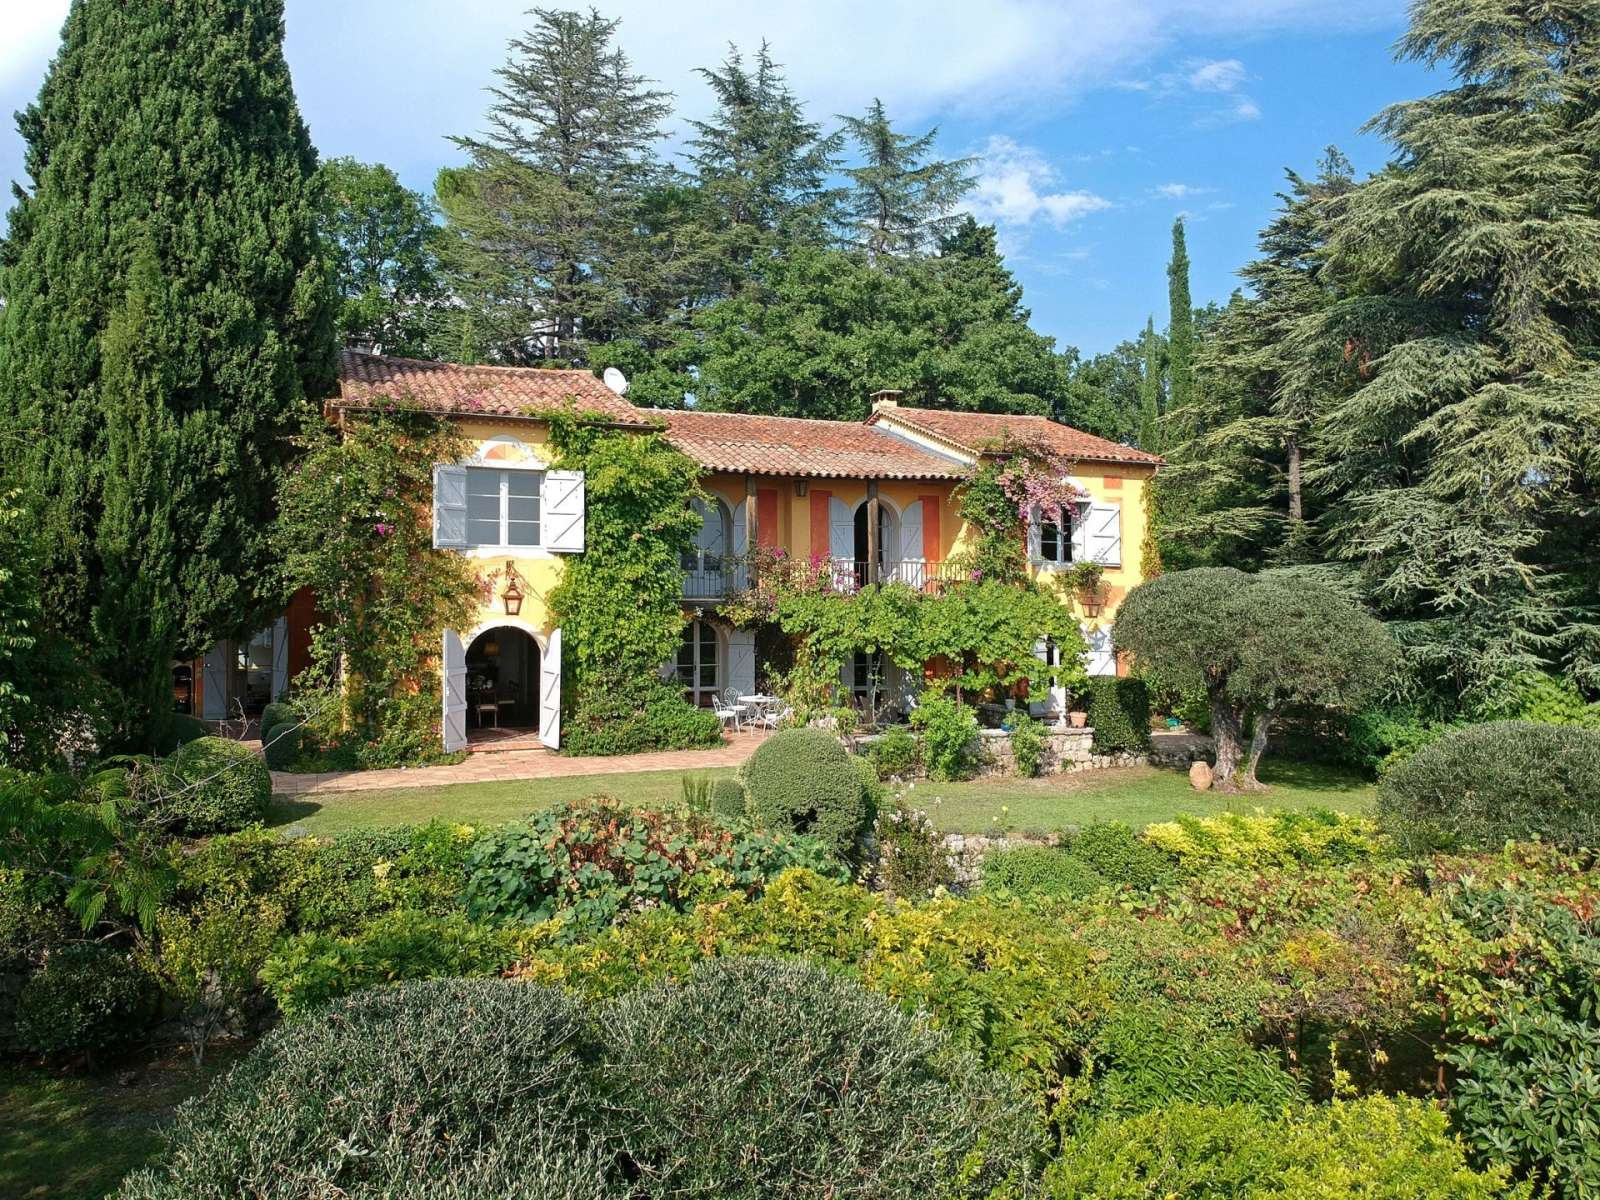 Estate of 1 hectare of land and great potential in Grasse